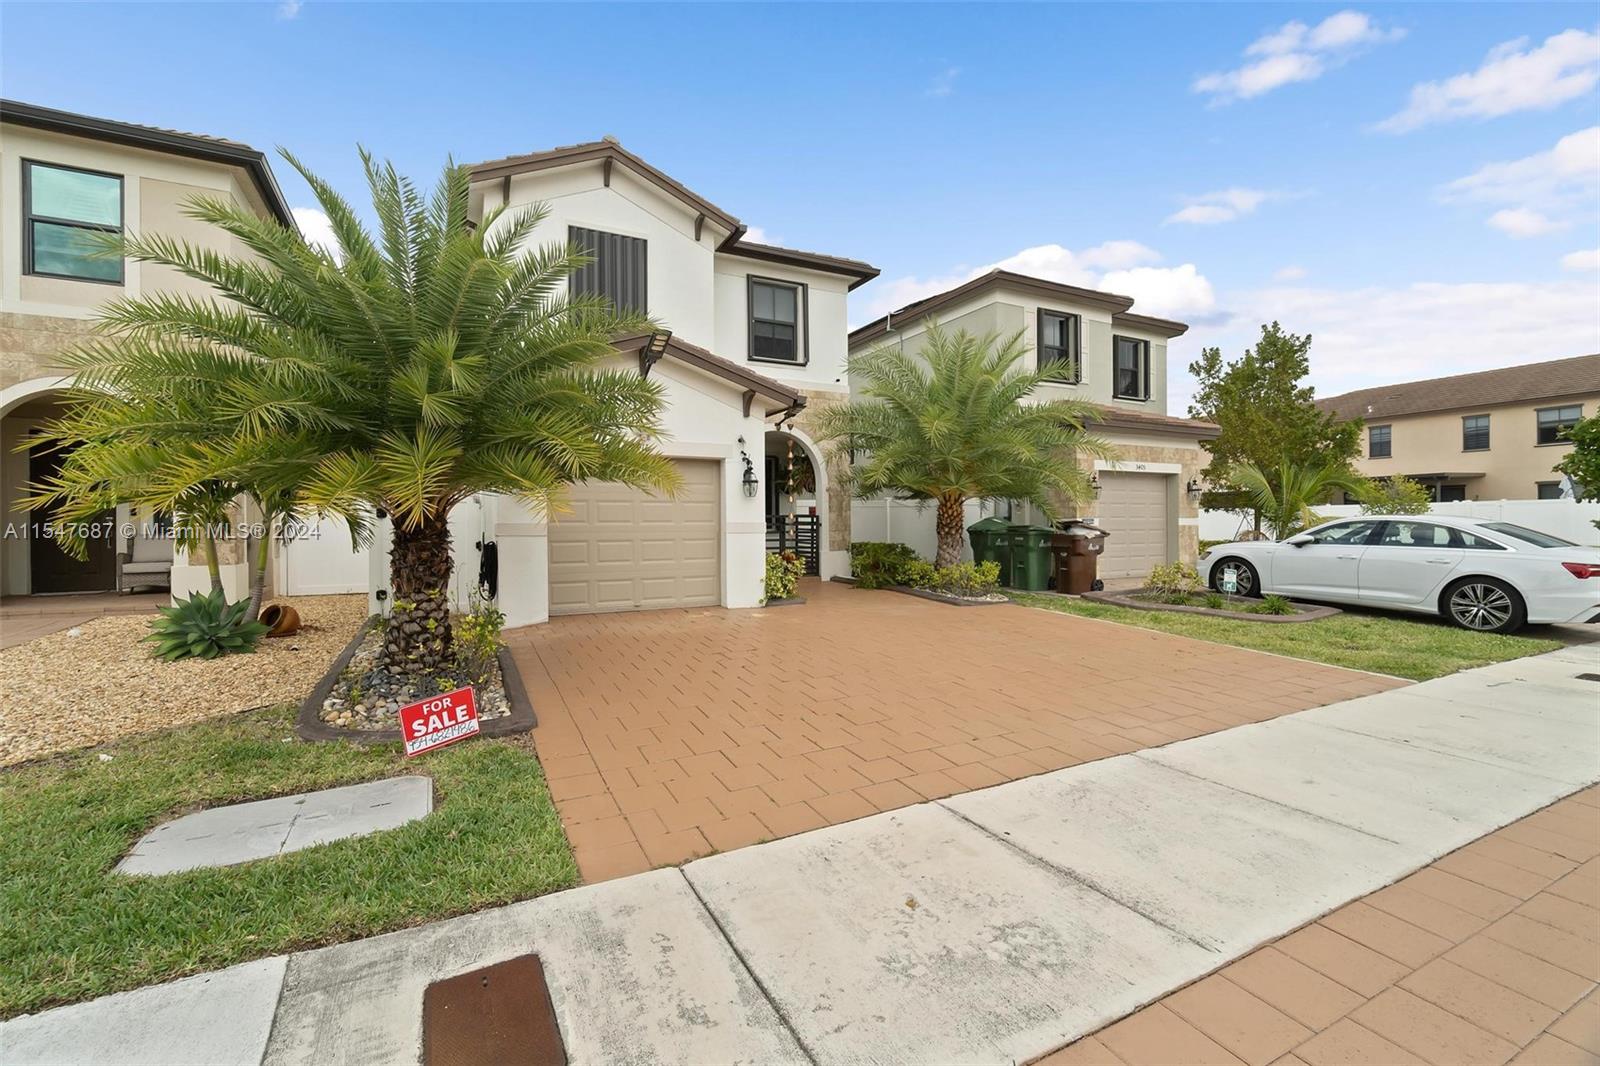 3411 W 110th St  For Sale A11547687, FL